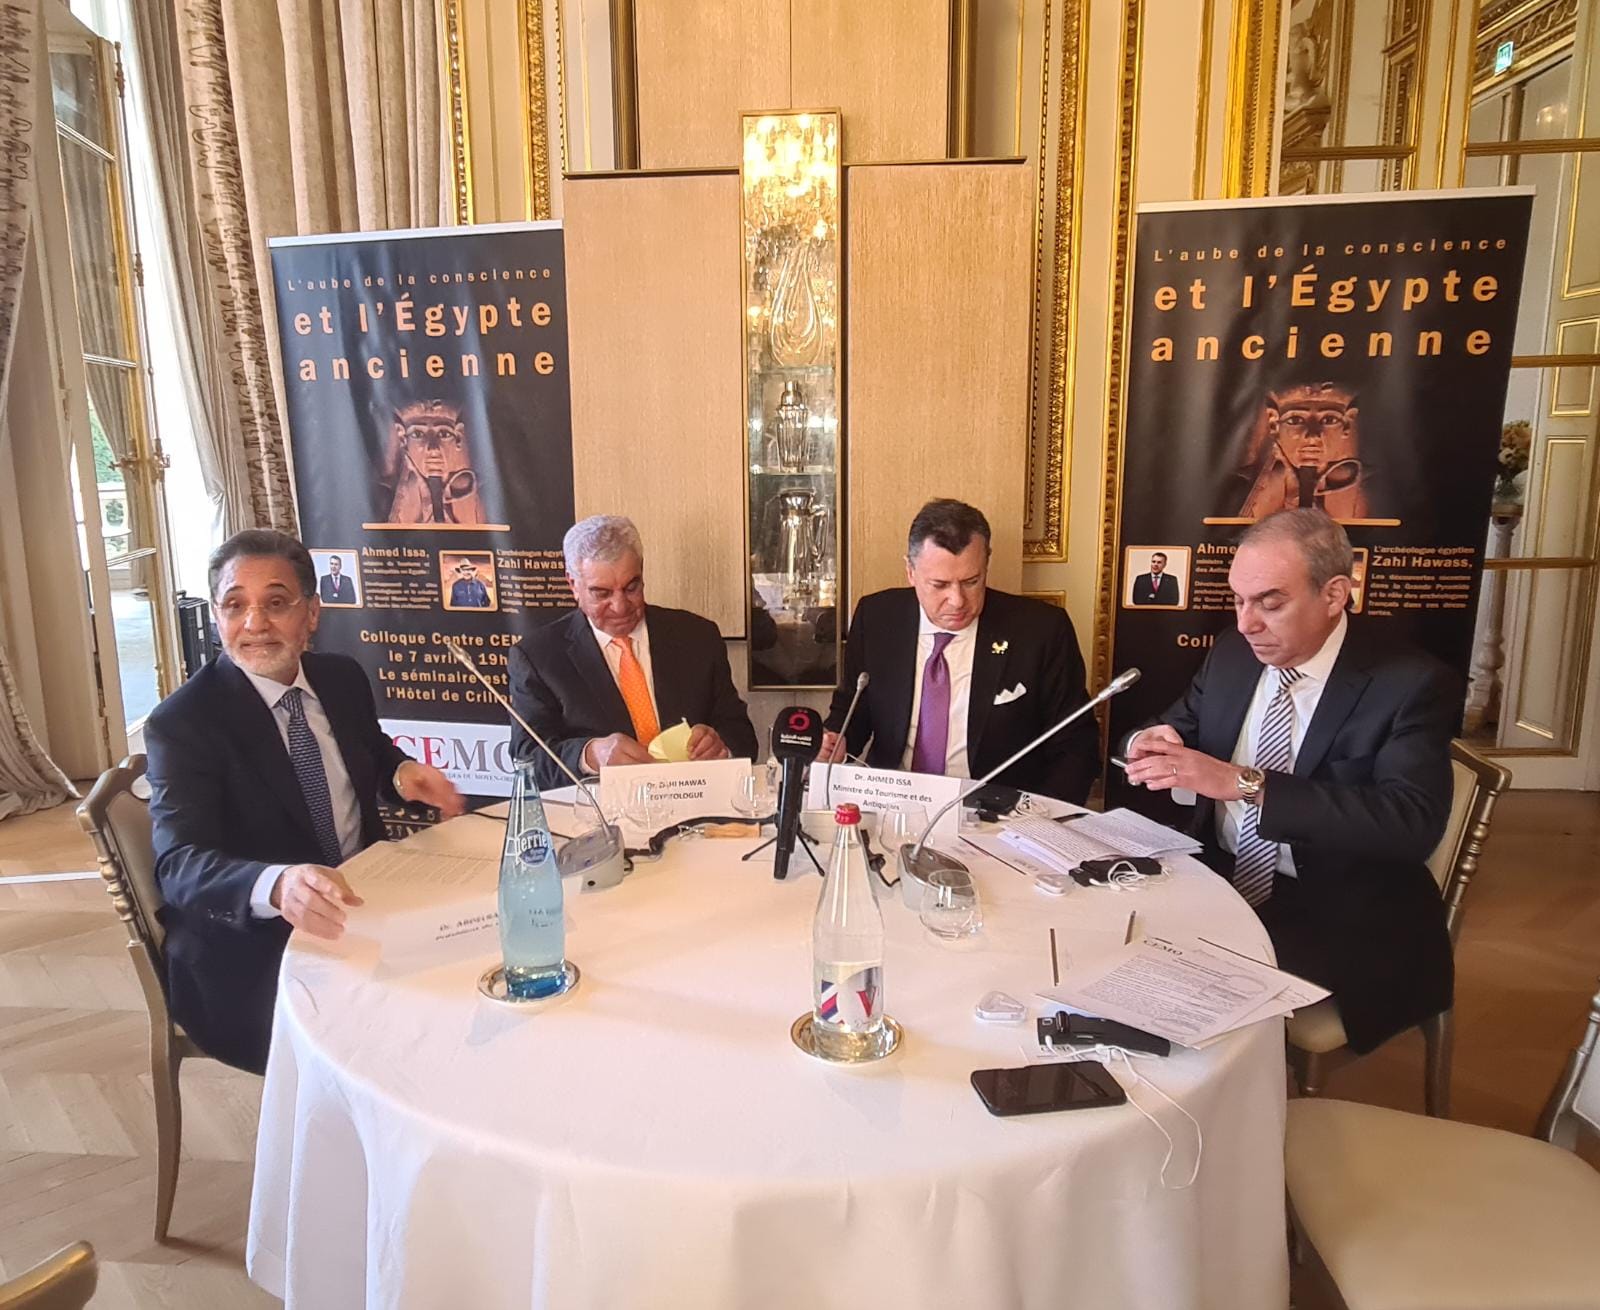 Ali points to attempts to establish dialogue between thinkers in Egypt, France